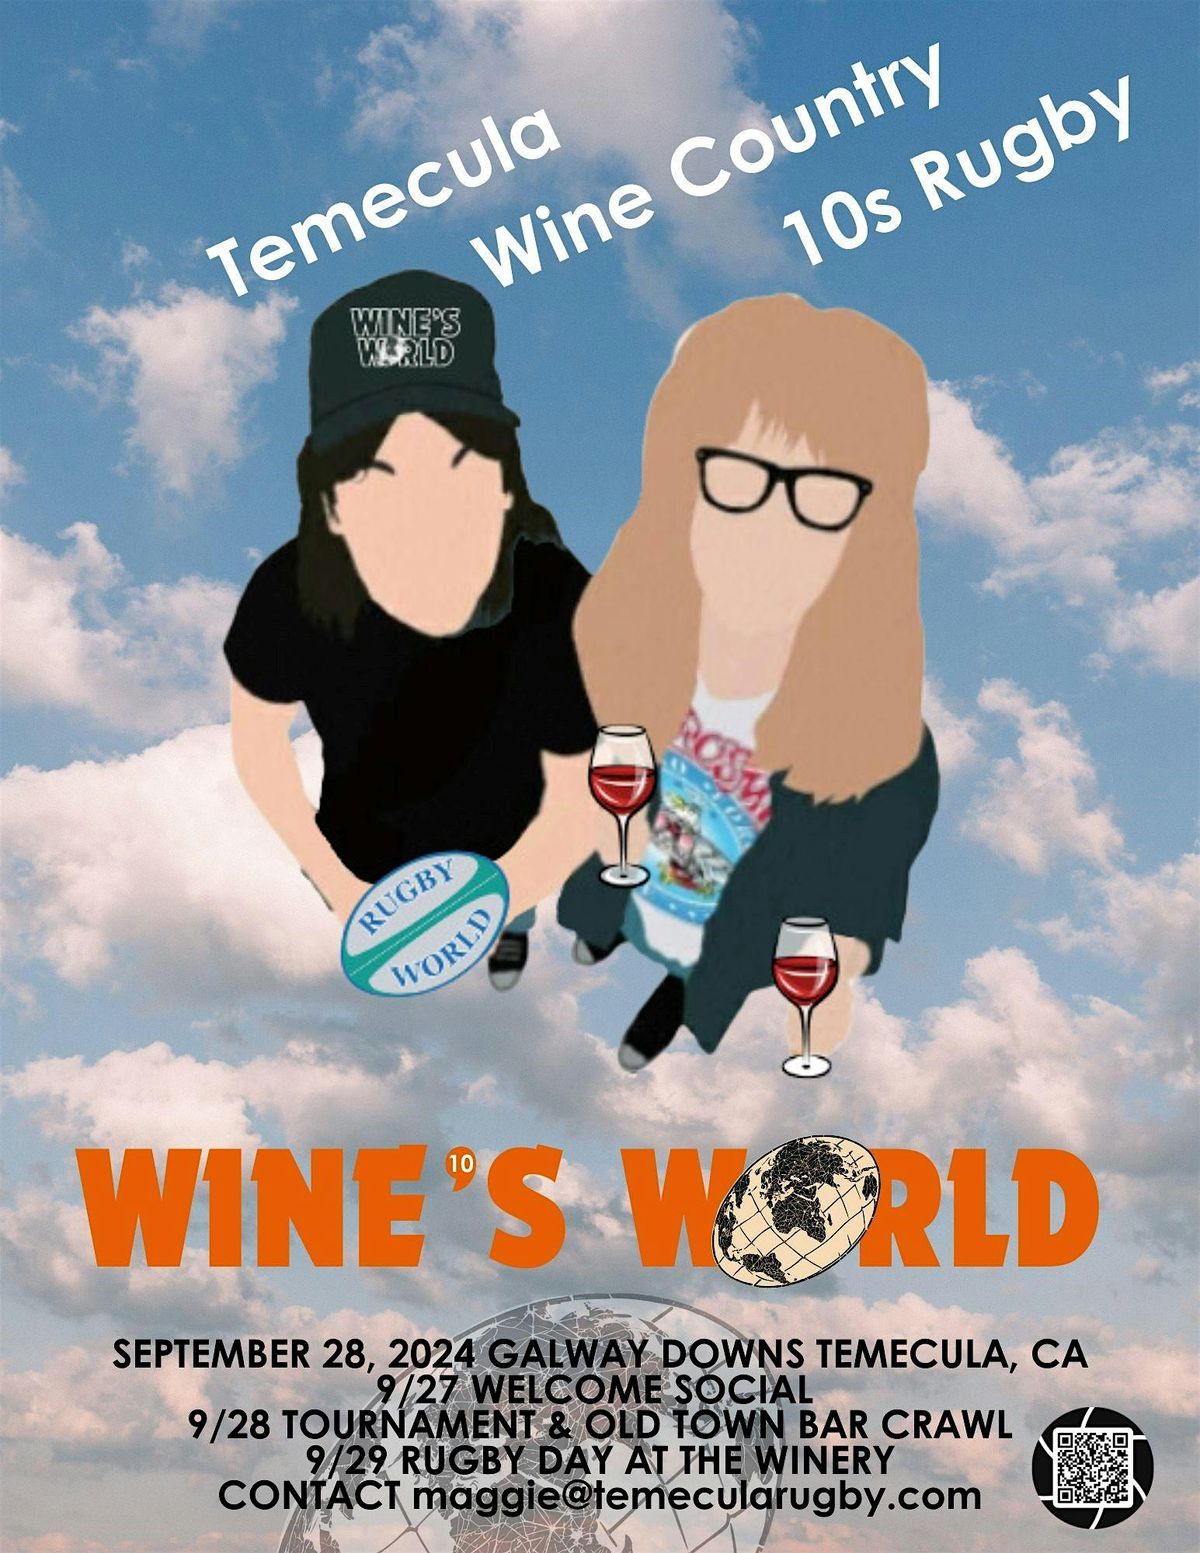 4th Temecula Wine Country 10s Rugby Invitational